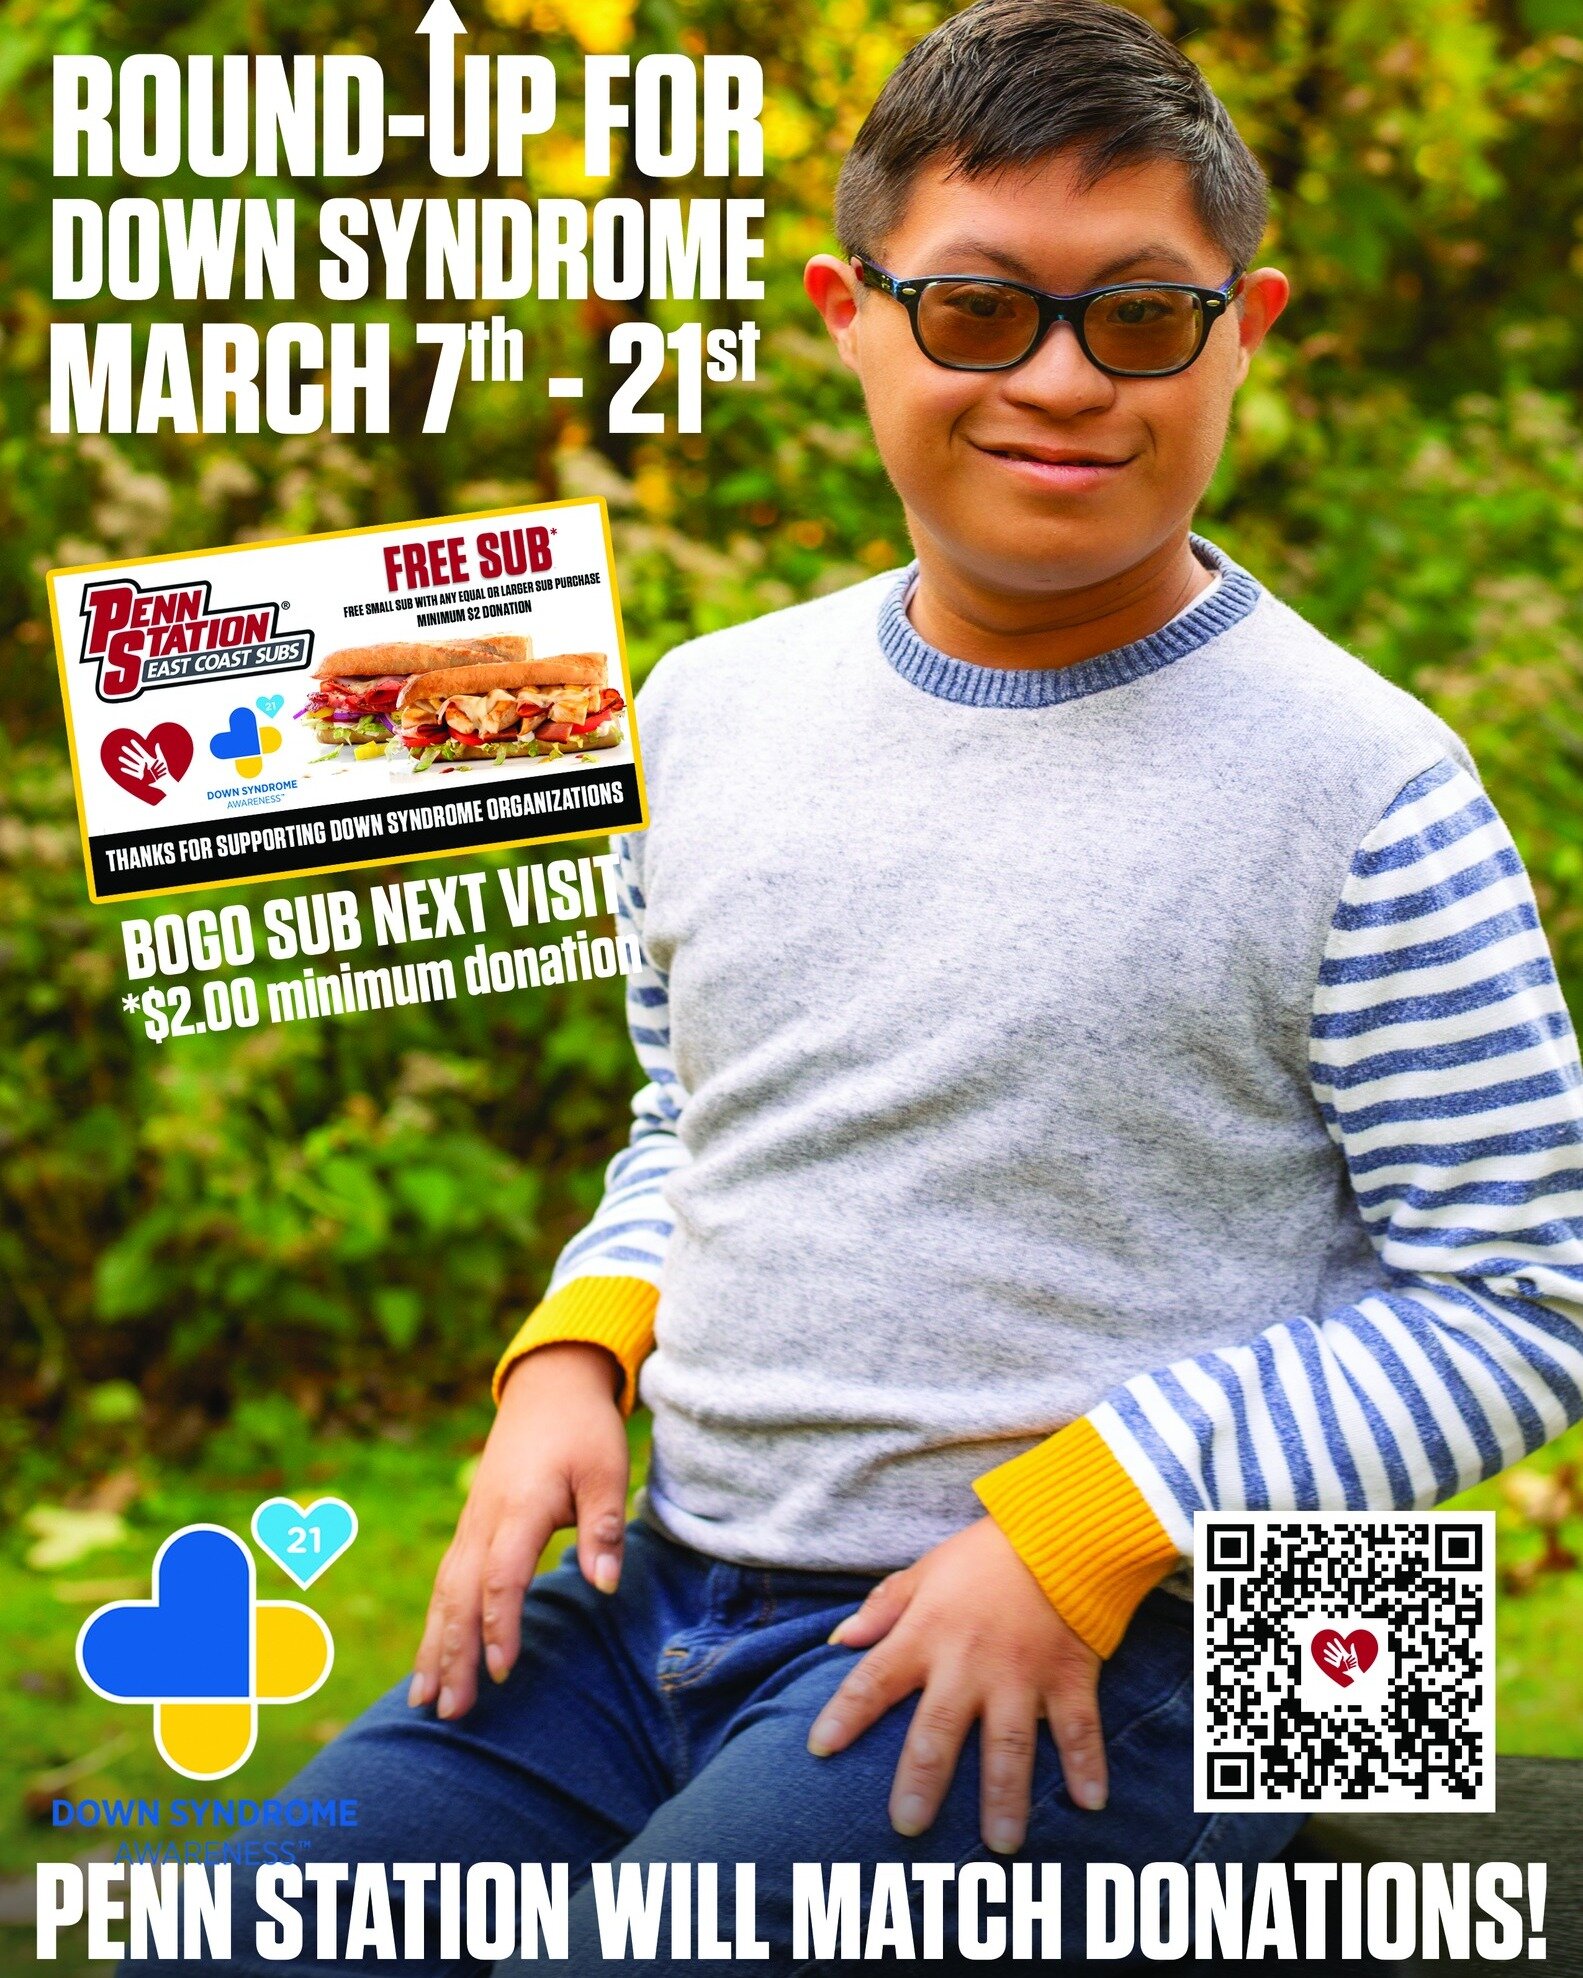 Starting THIS WEEK! In just 3 days, this incredible campaign starts. Don't forget to round UP for Down syndrome at Penn Station!